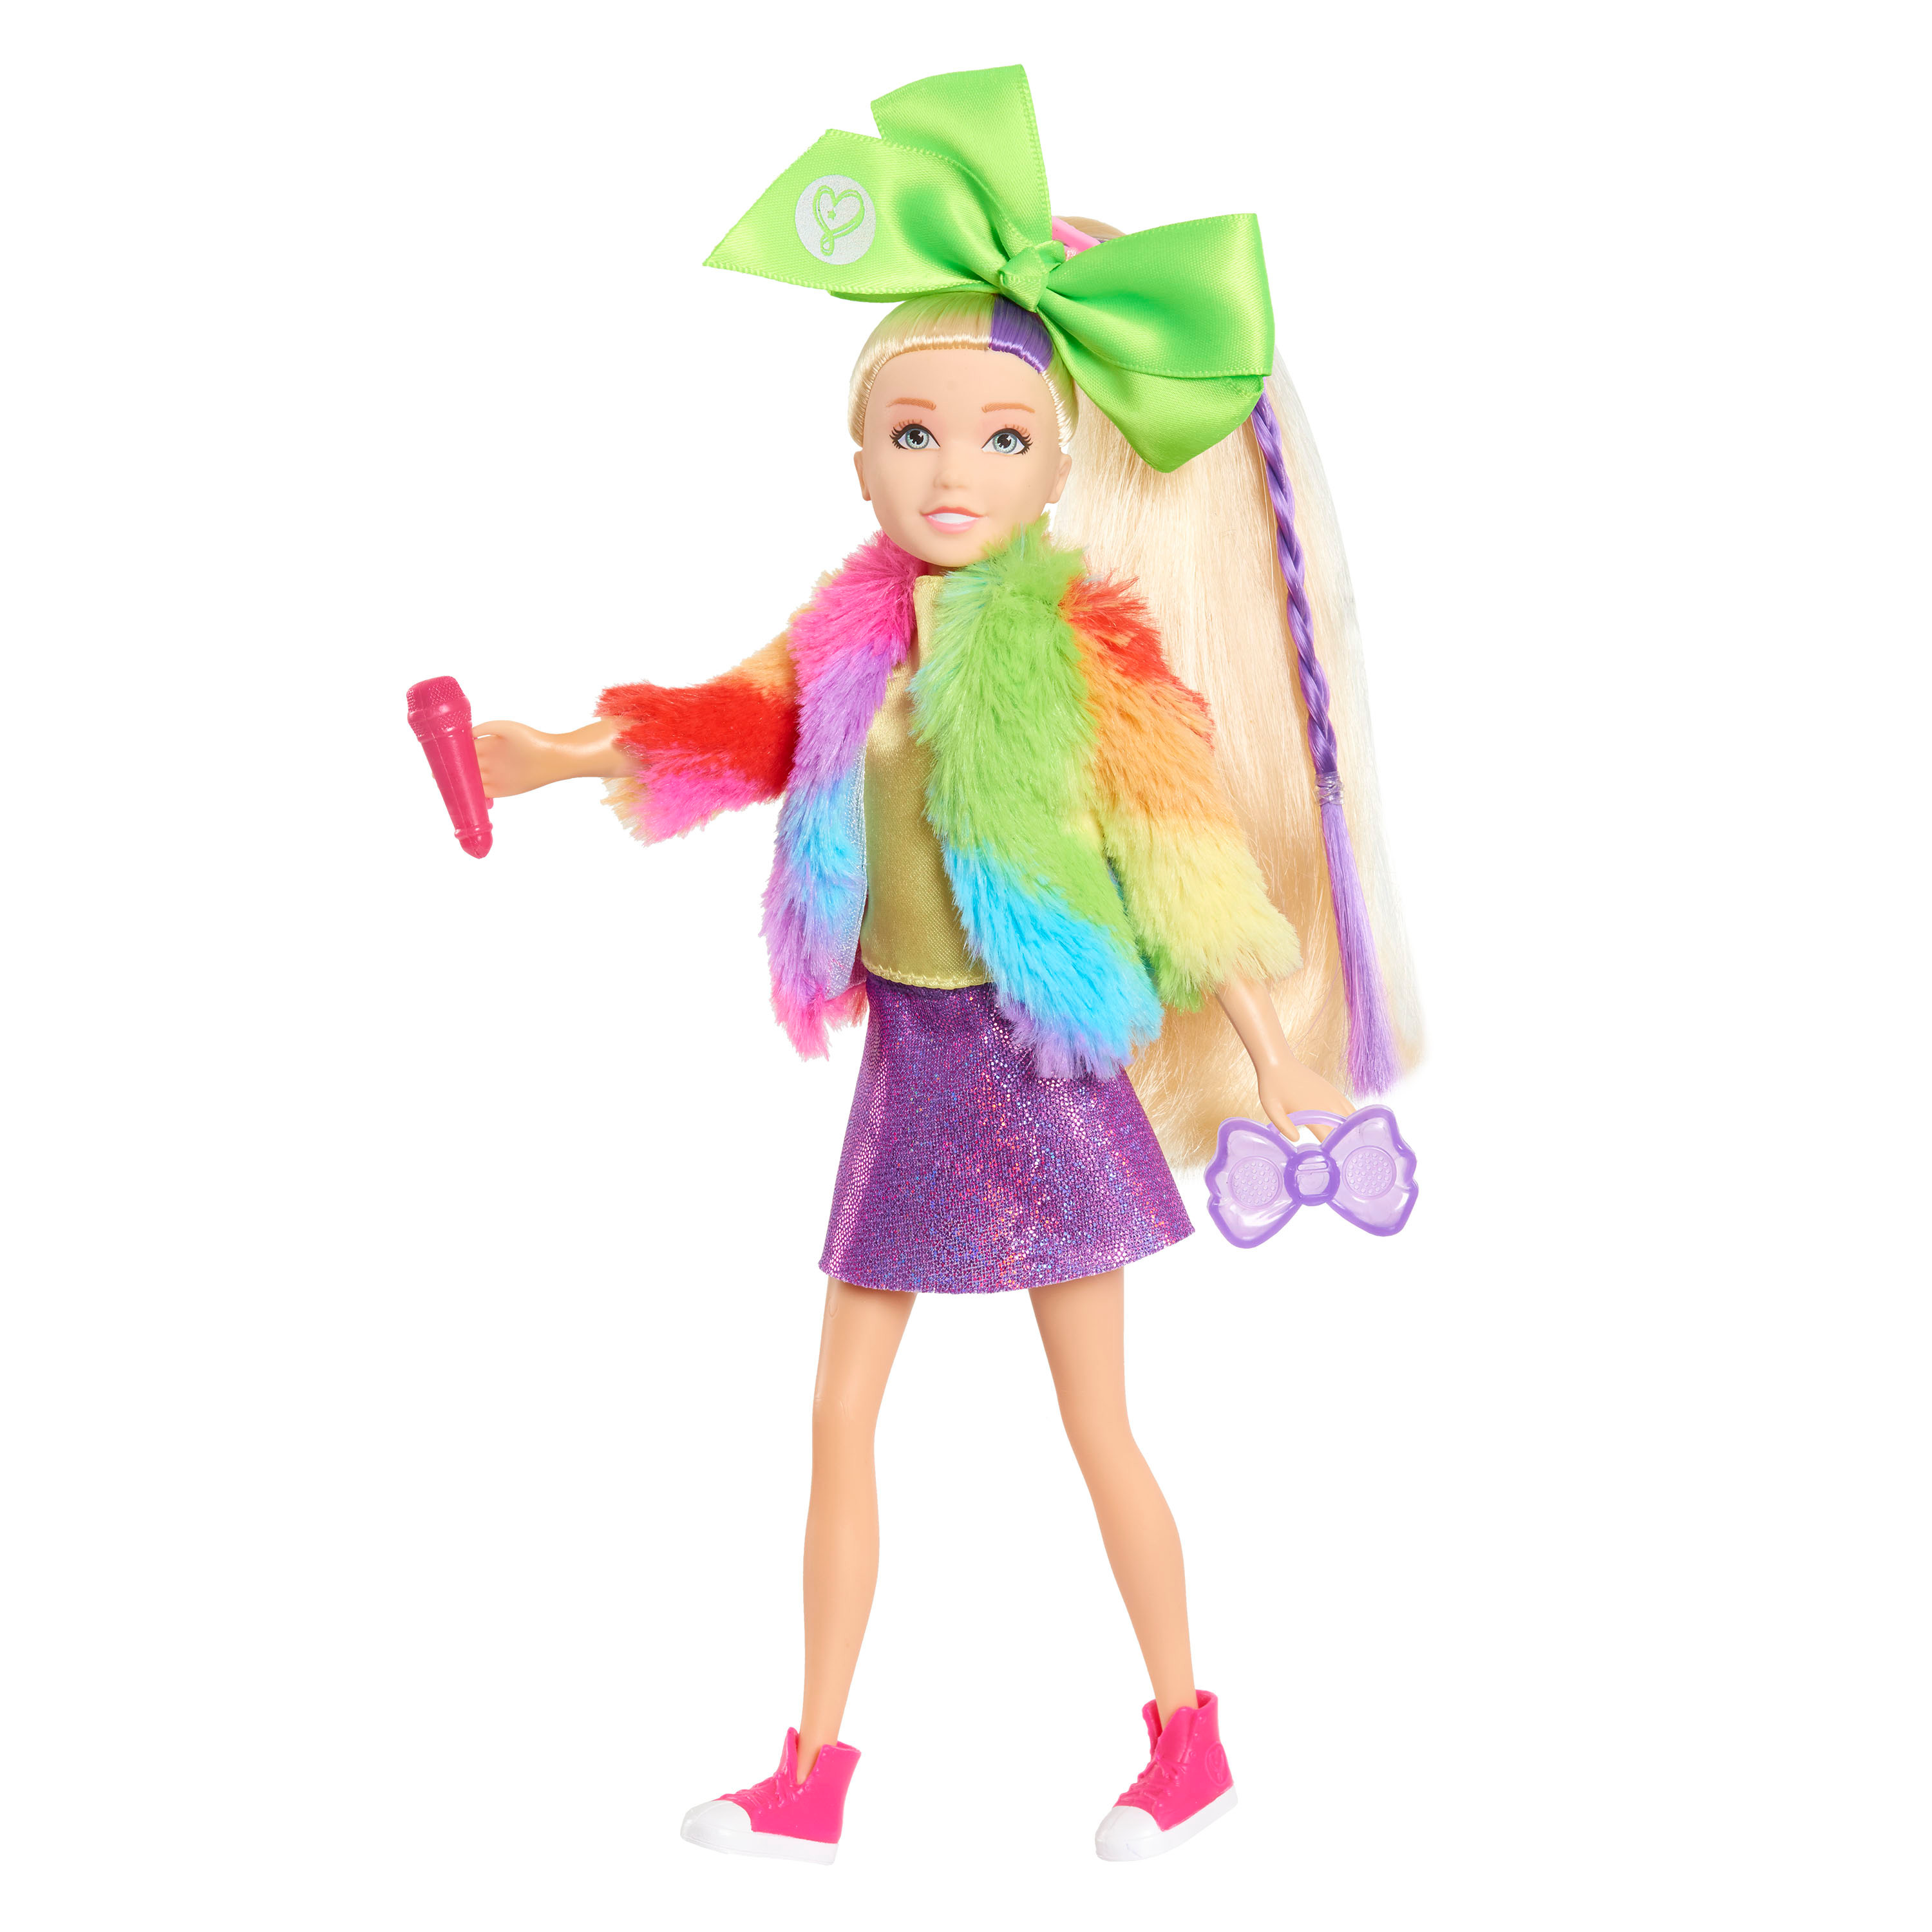 JoJo Siwa Fashion Doll, TV host, 10-inch doll,  Kids Toys for Ages 3 Up, Gifts and Presents - image 2 of 8